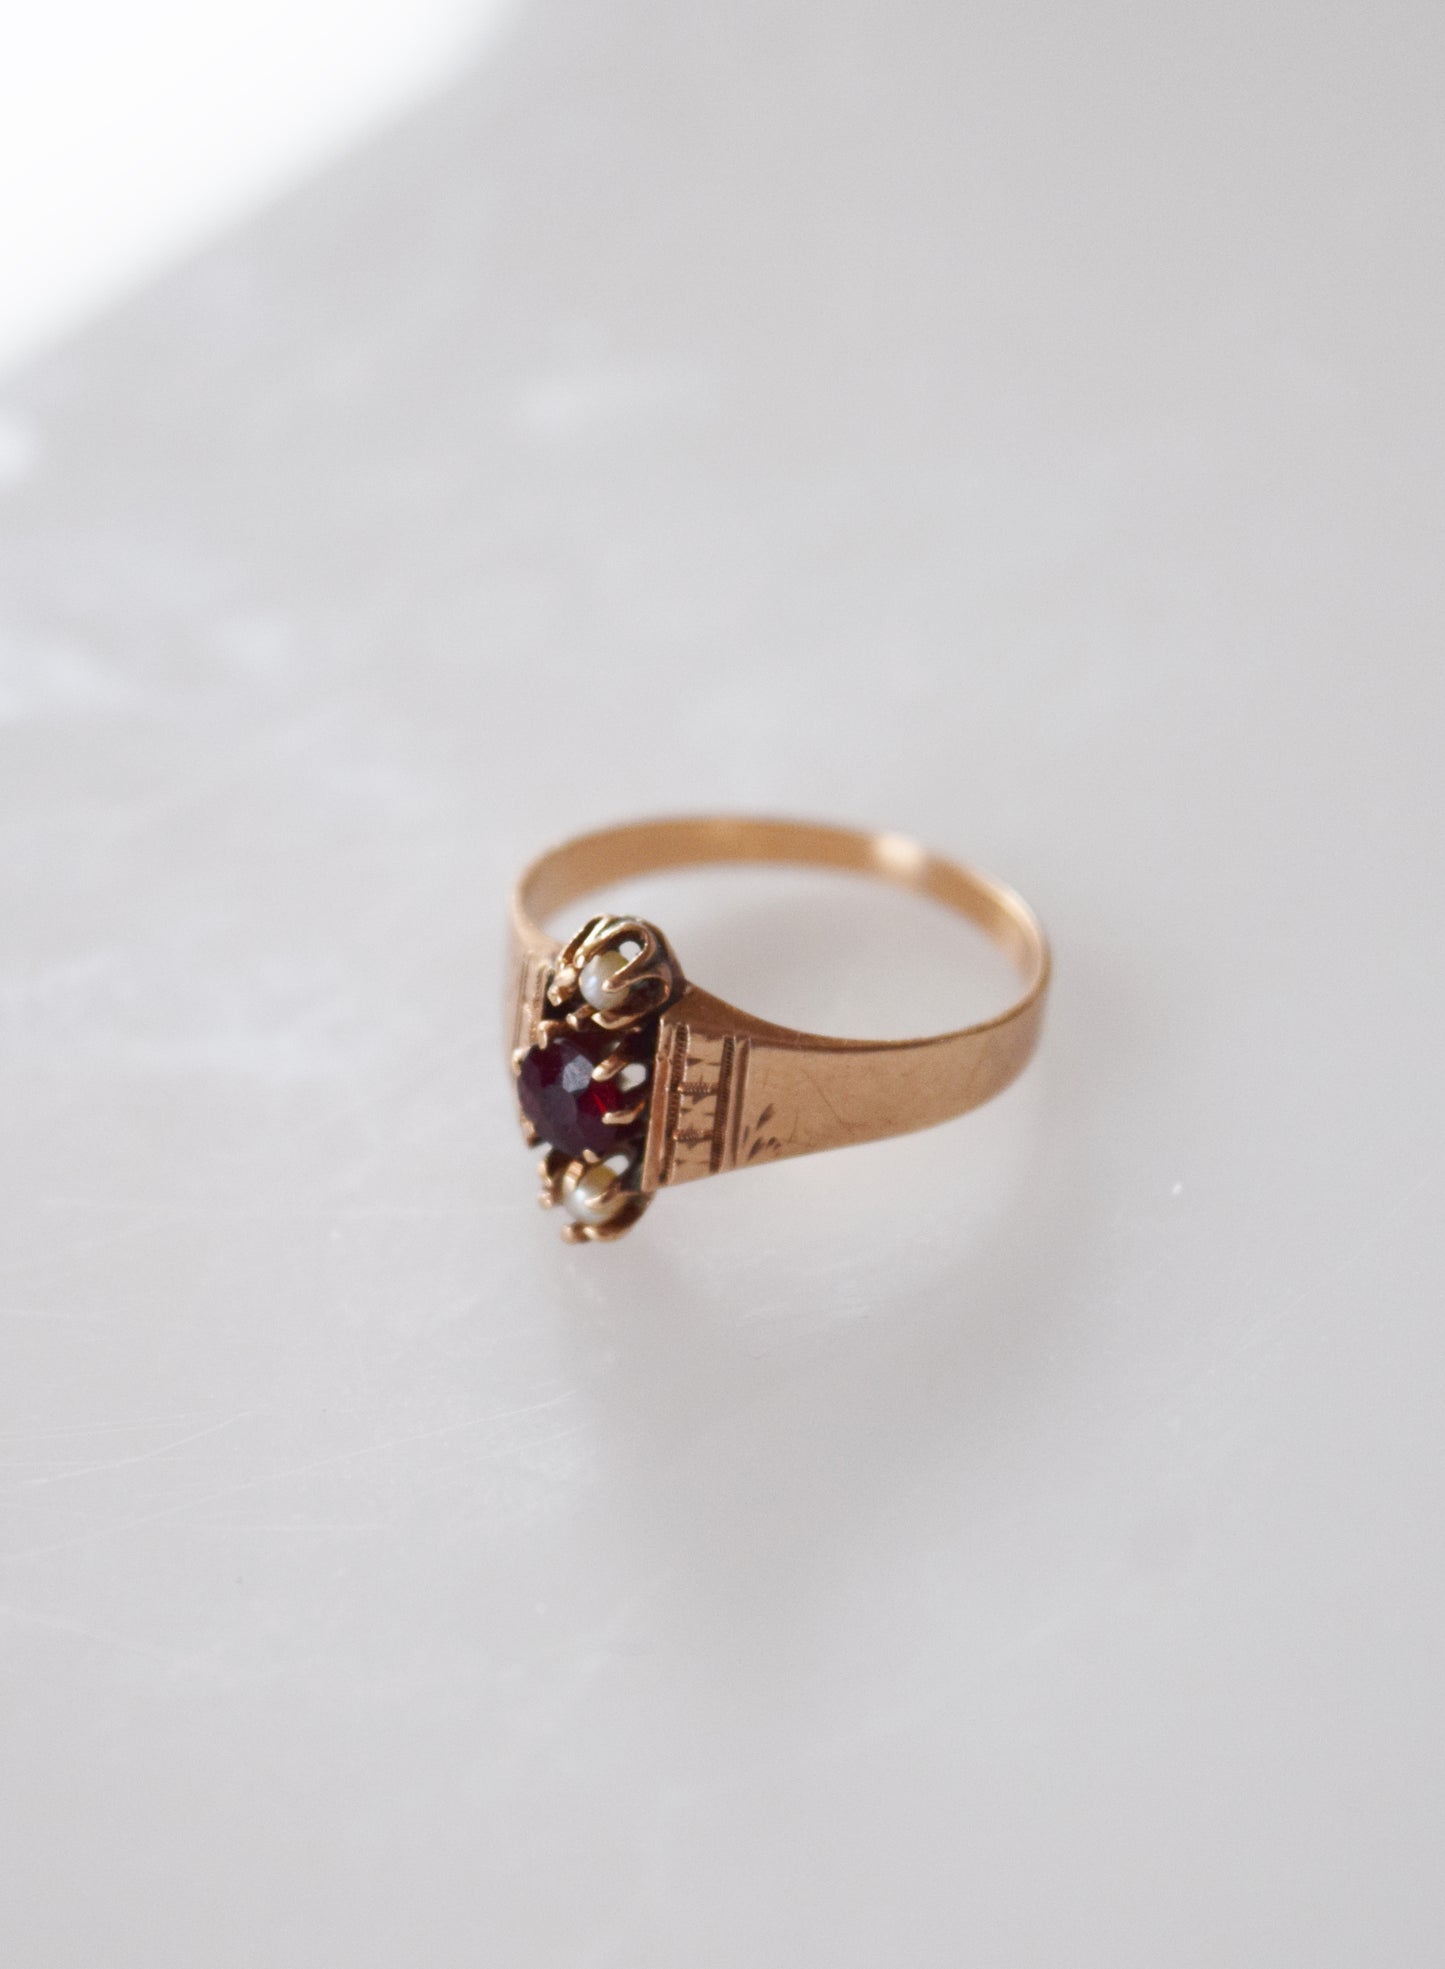 Antique Victorian 10kt Gold, Garnet and Pearl Ring | Sz. 6